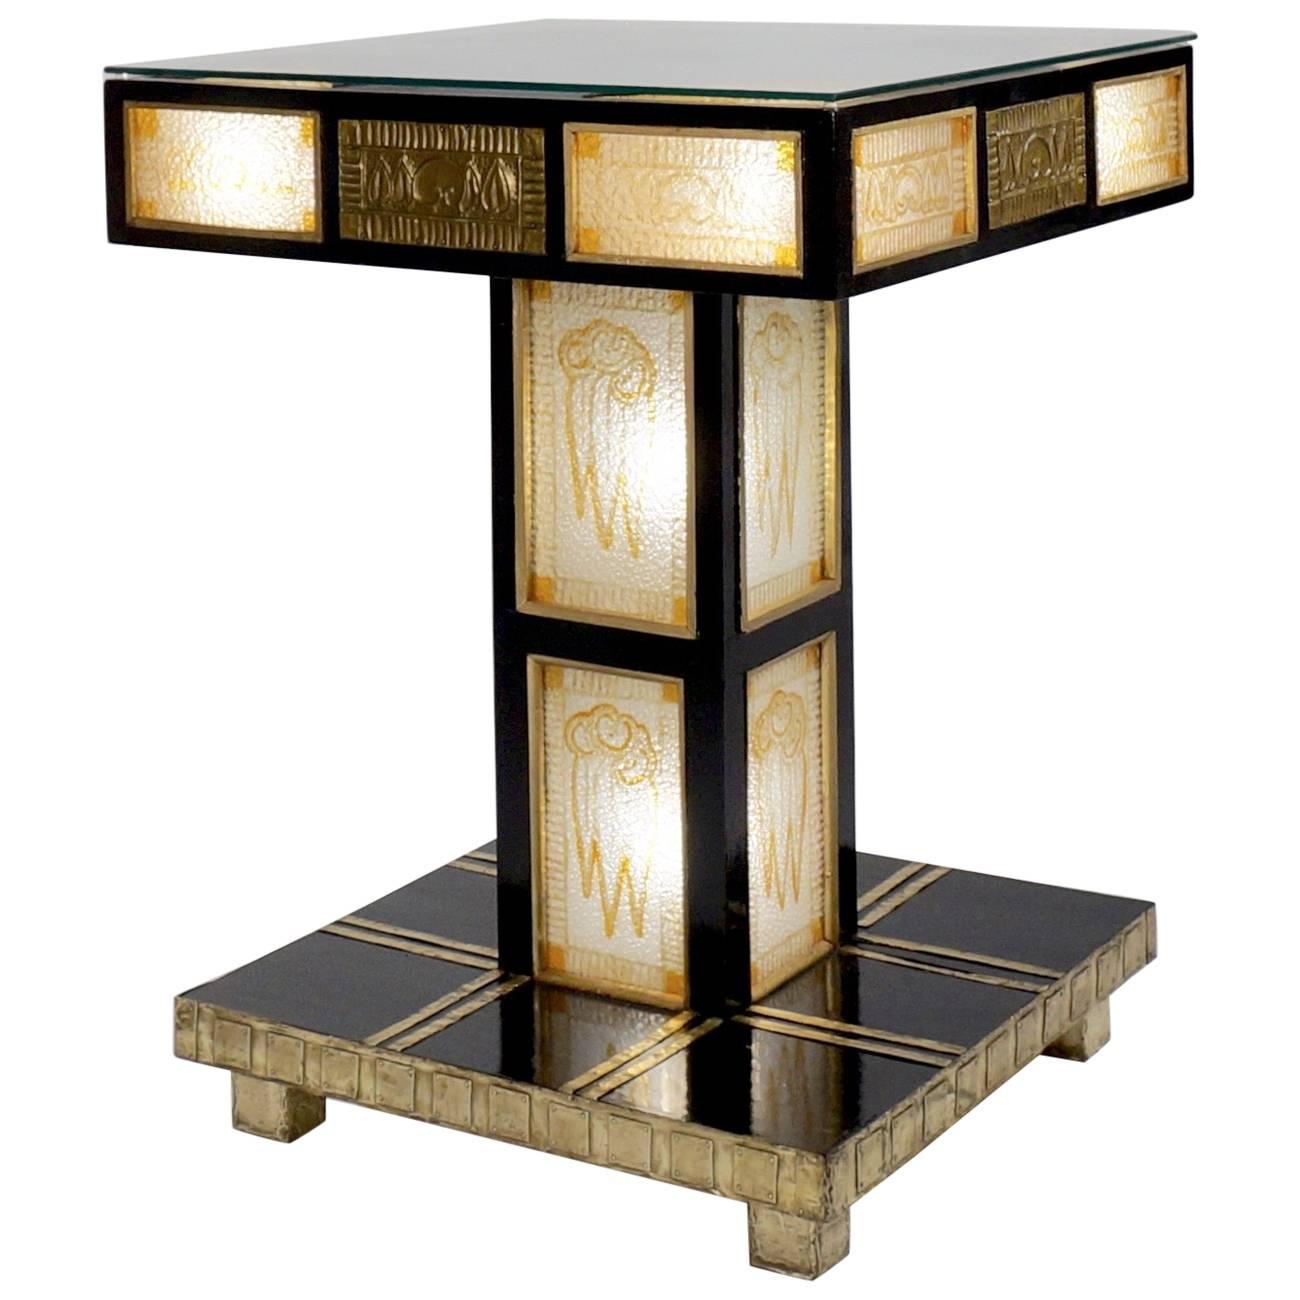 Square Secessionist Ebonized and Glazed Electrified Pedestal Table